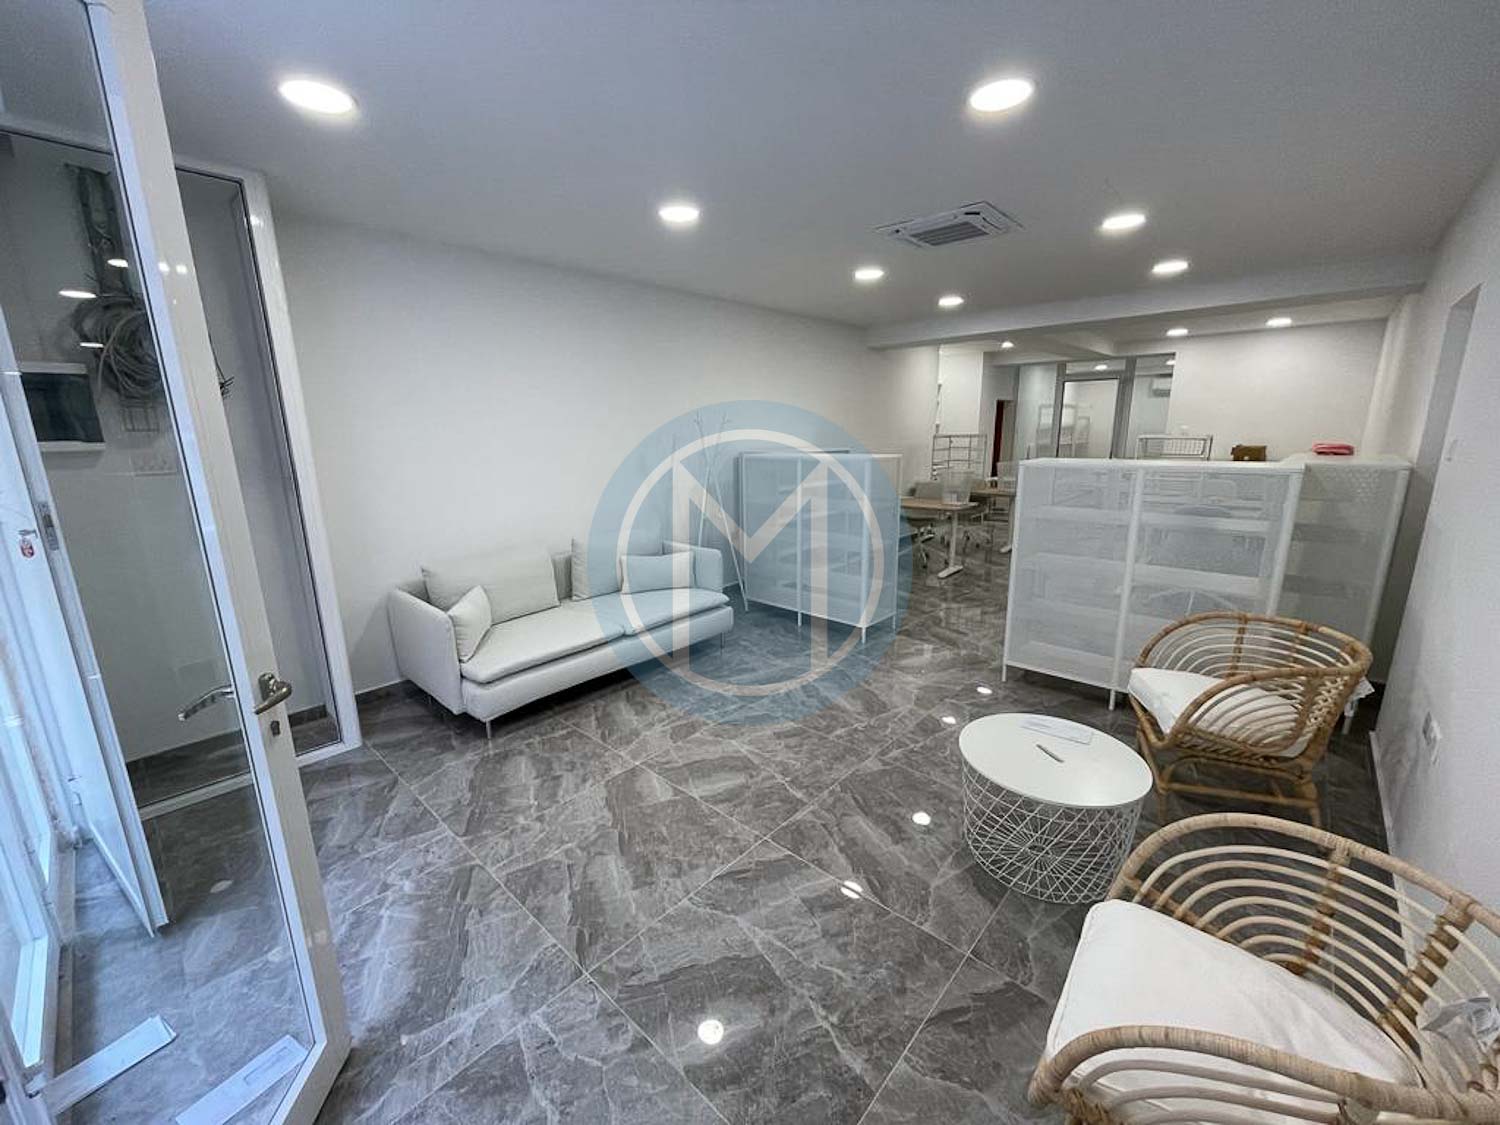 100 SQM Gzira Office To Let